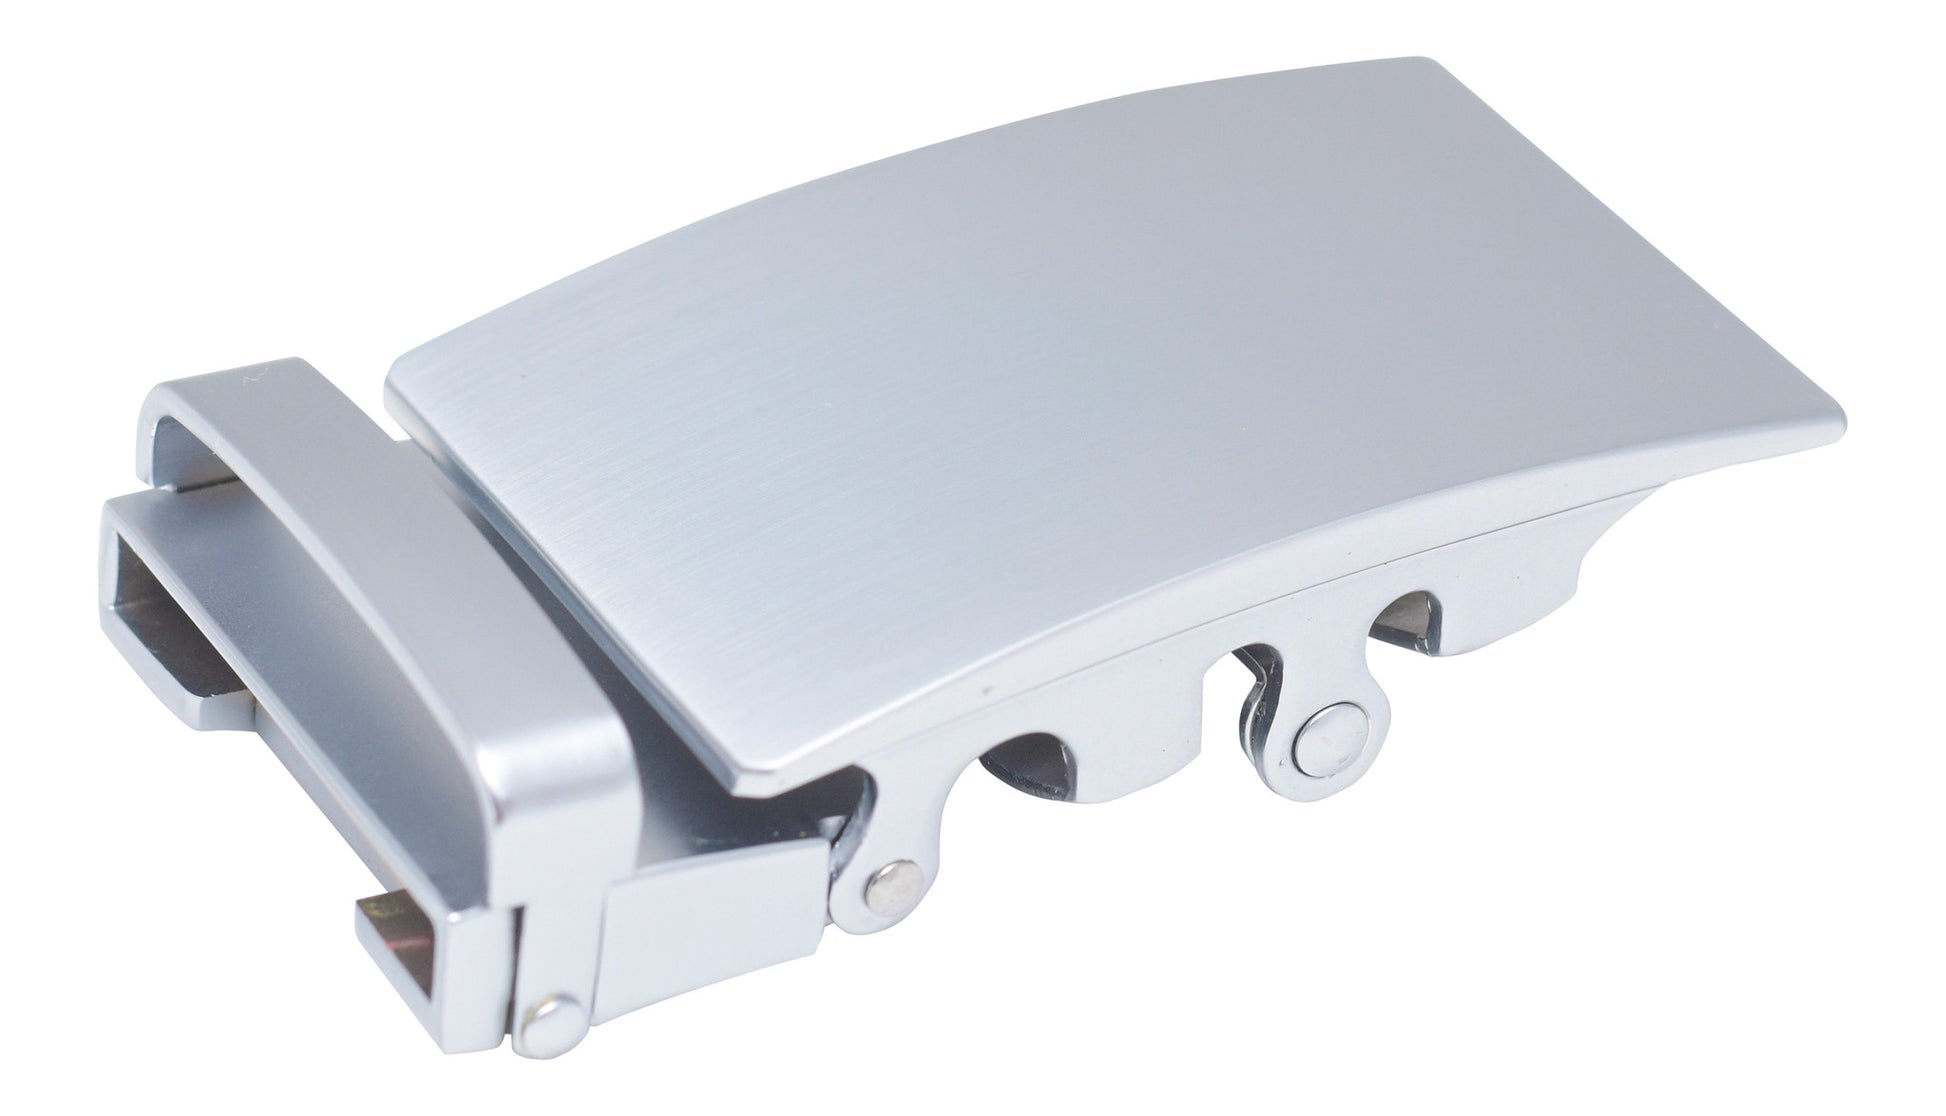 Men's classic ratchet belt buckle in silver with a width of 1.5 inches, right side view.